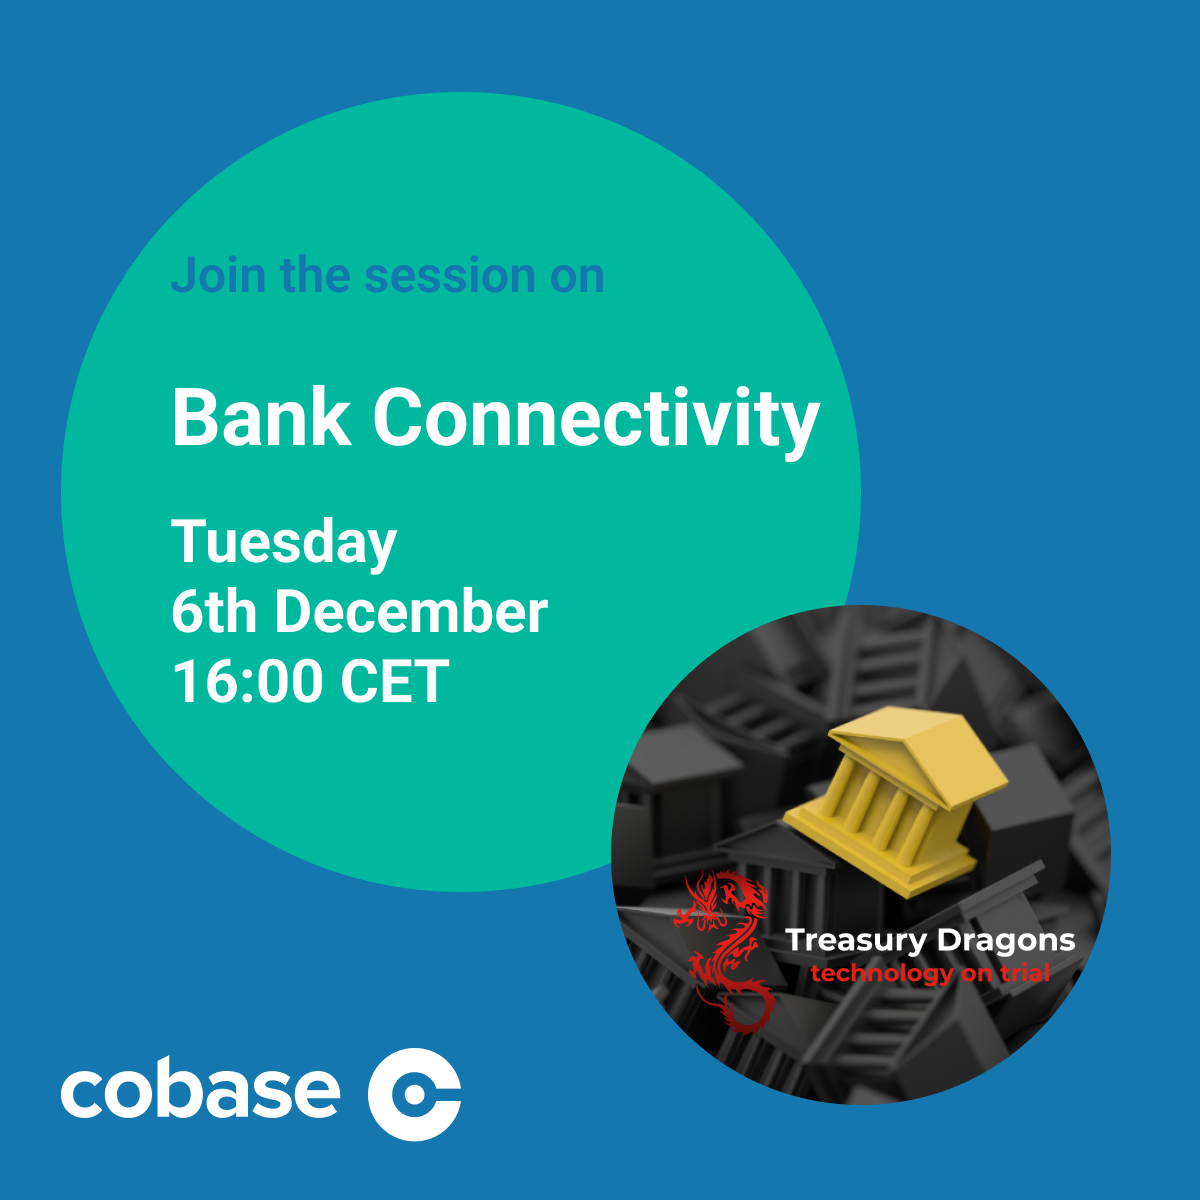 Cobase faces the Treasury Dragons on Bank Connectivity and Format Conversion